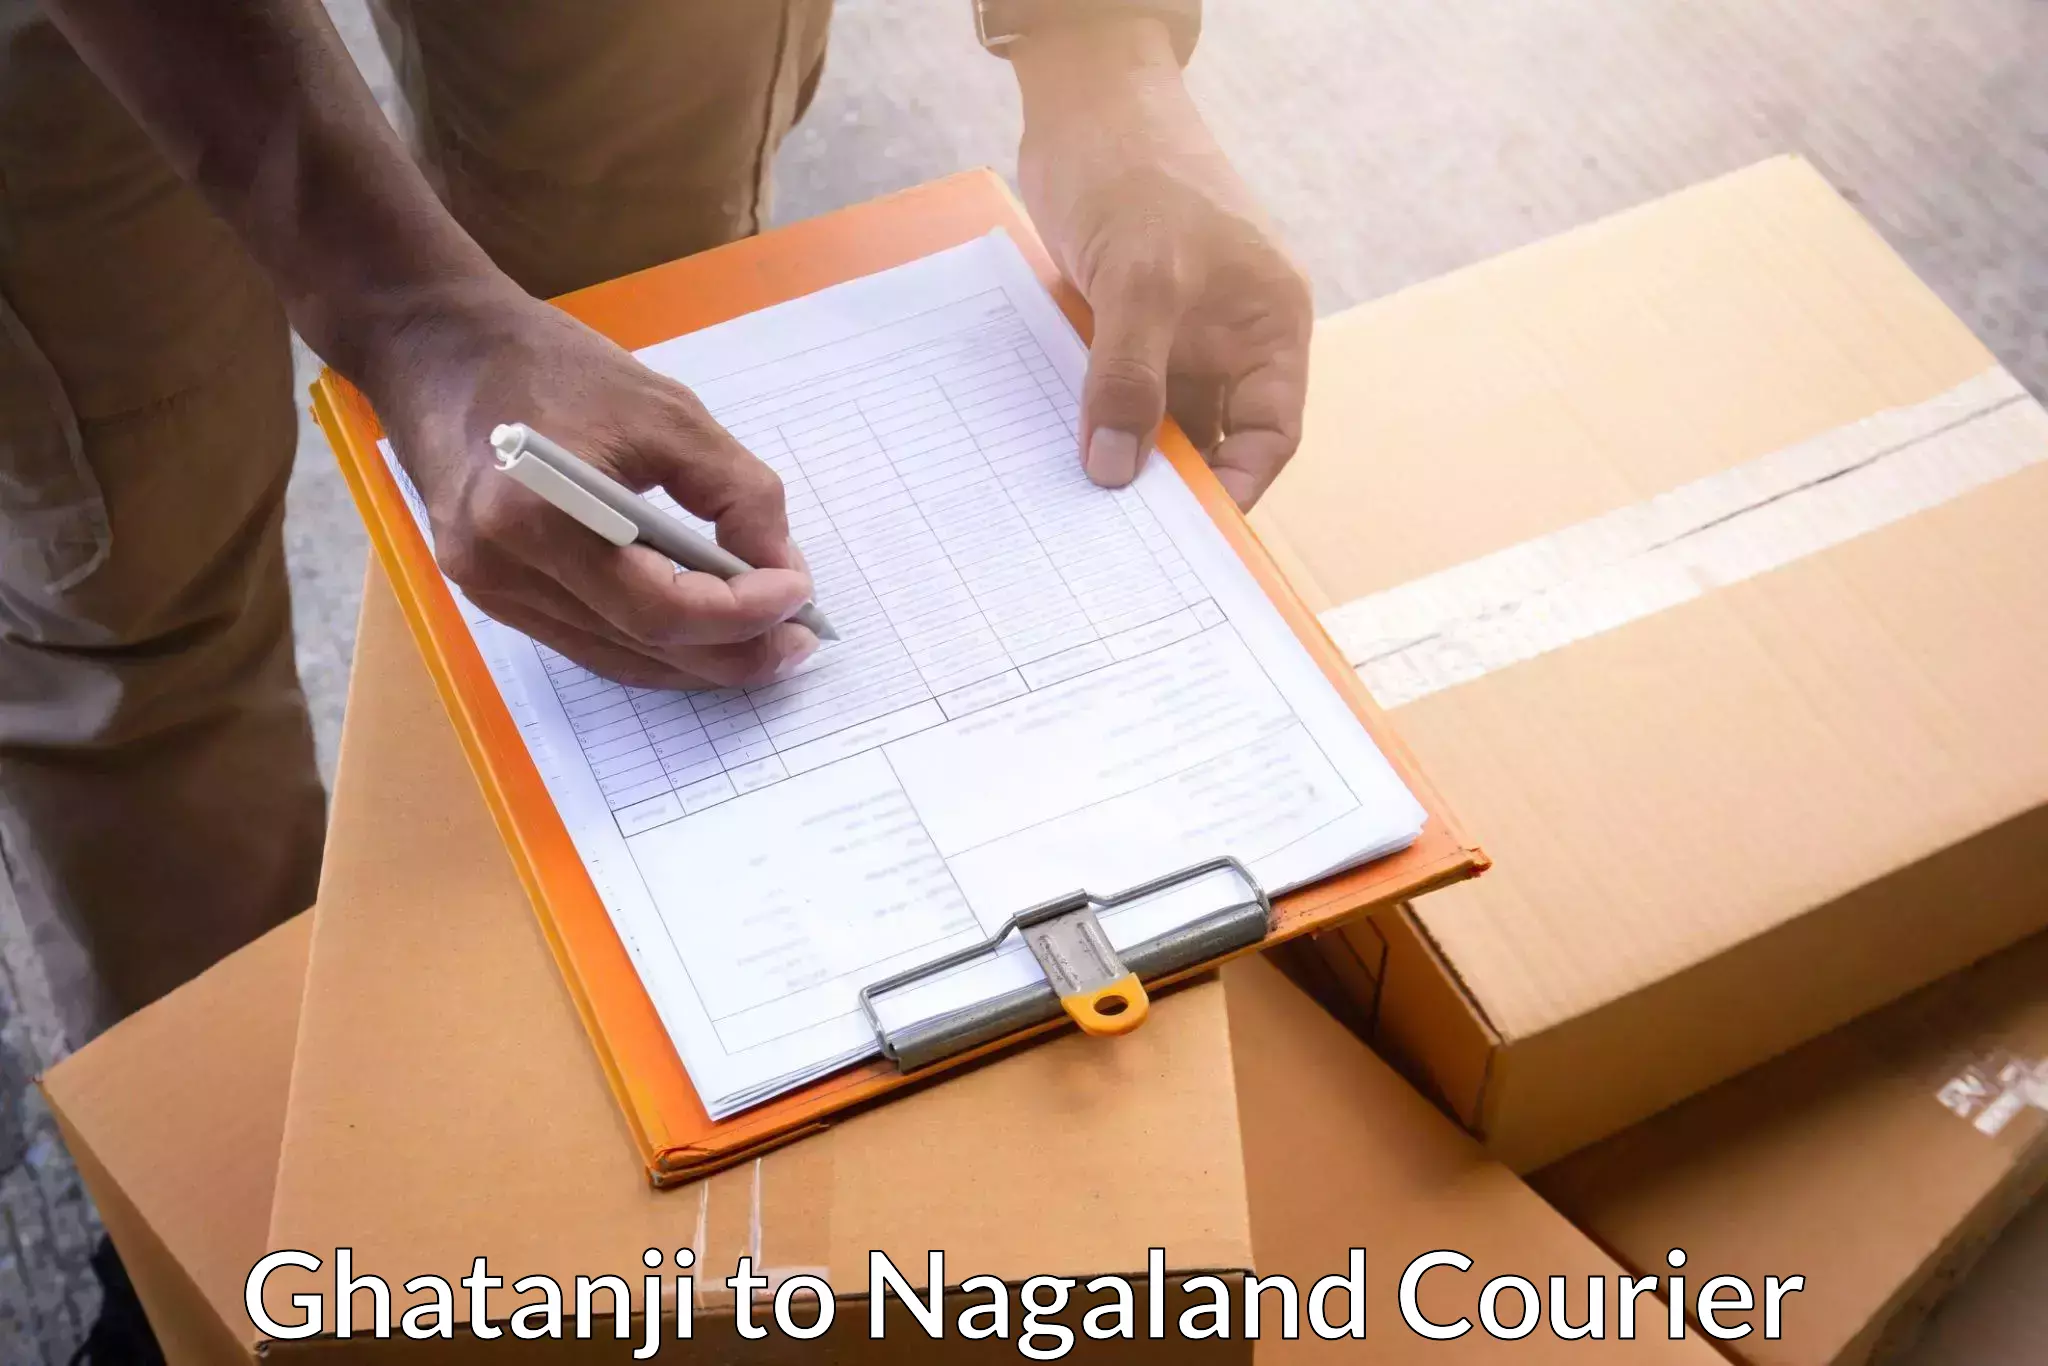 Sustainable shipping practices Ghatanji to Nagaland